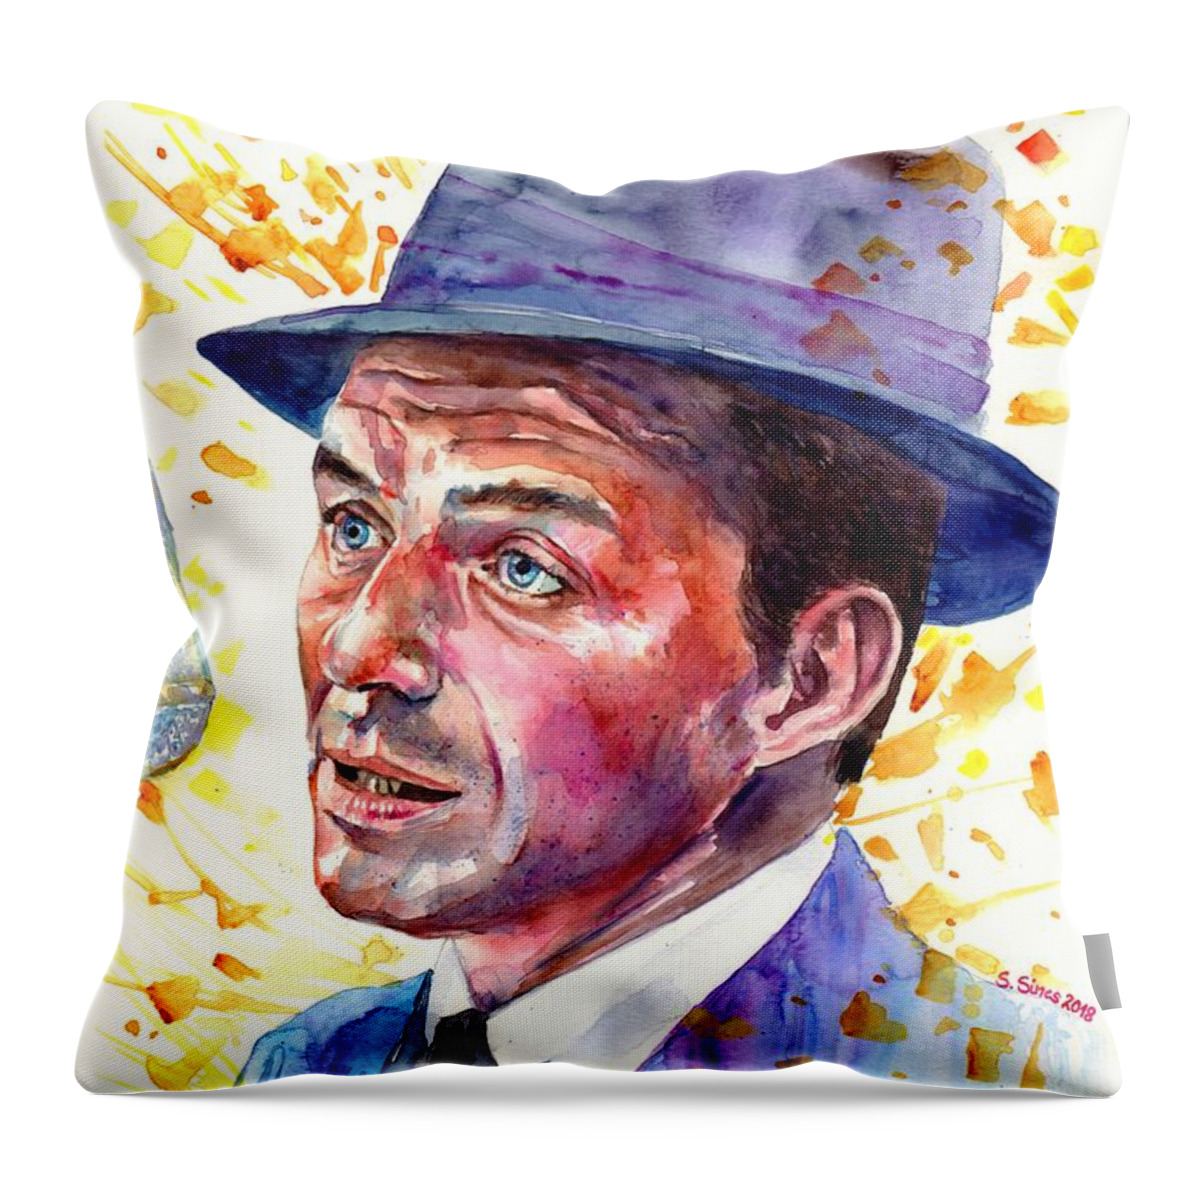 Frank Throw Pillow featuring the painting Frank Sinatra Singing by Suzann Sines